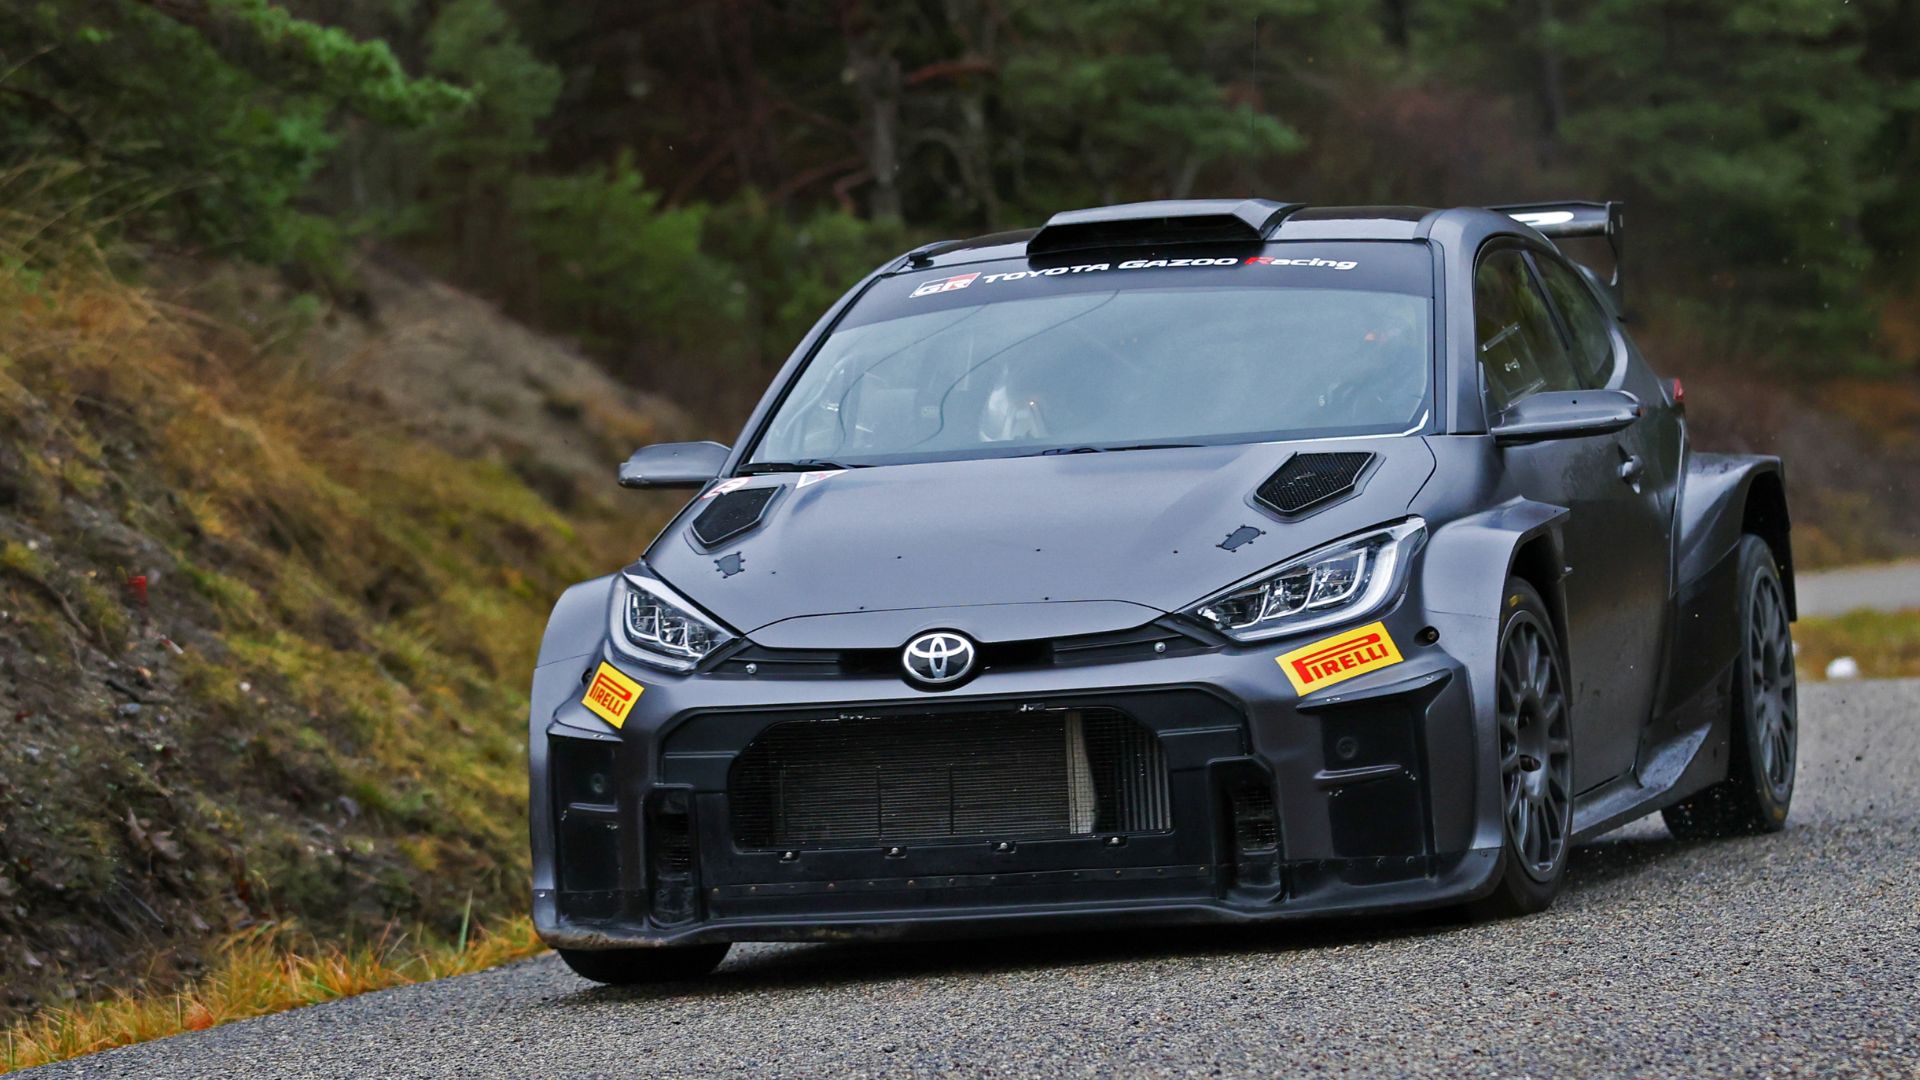 technically, you can buy this rally-spec toyota gr yaris race car